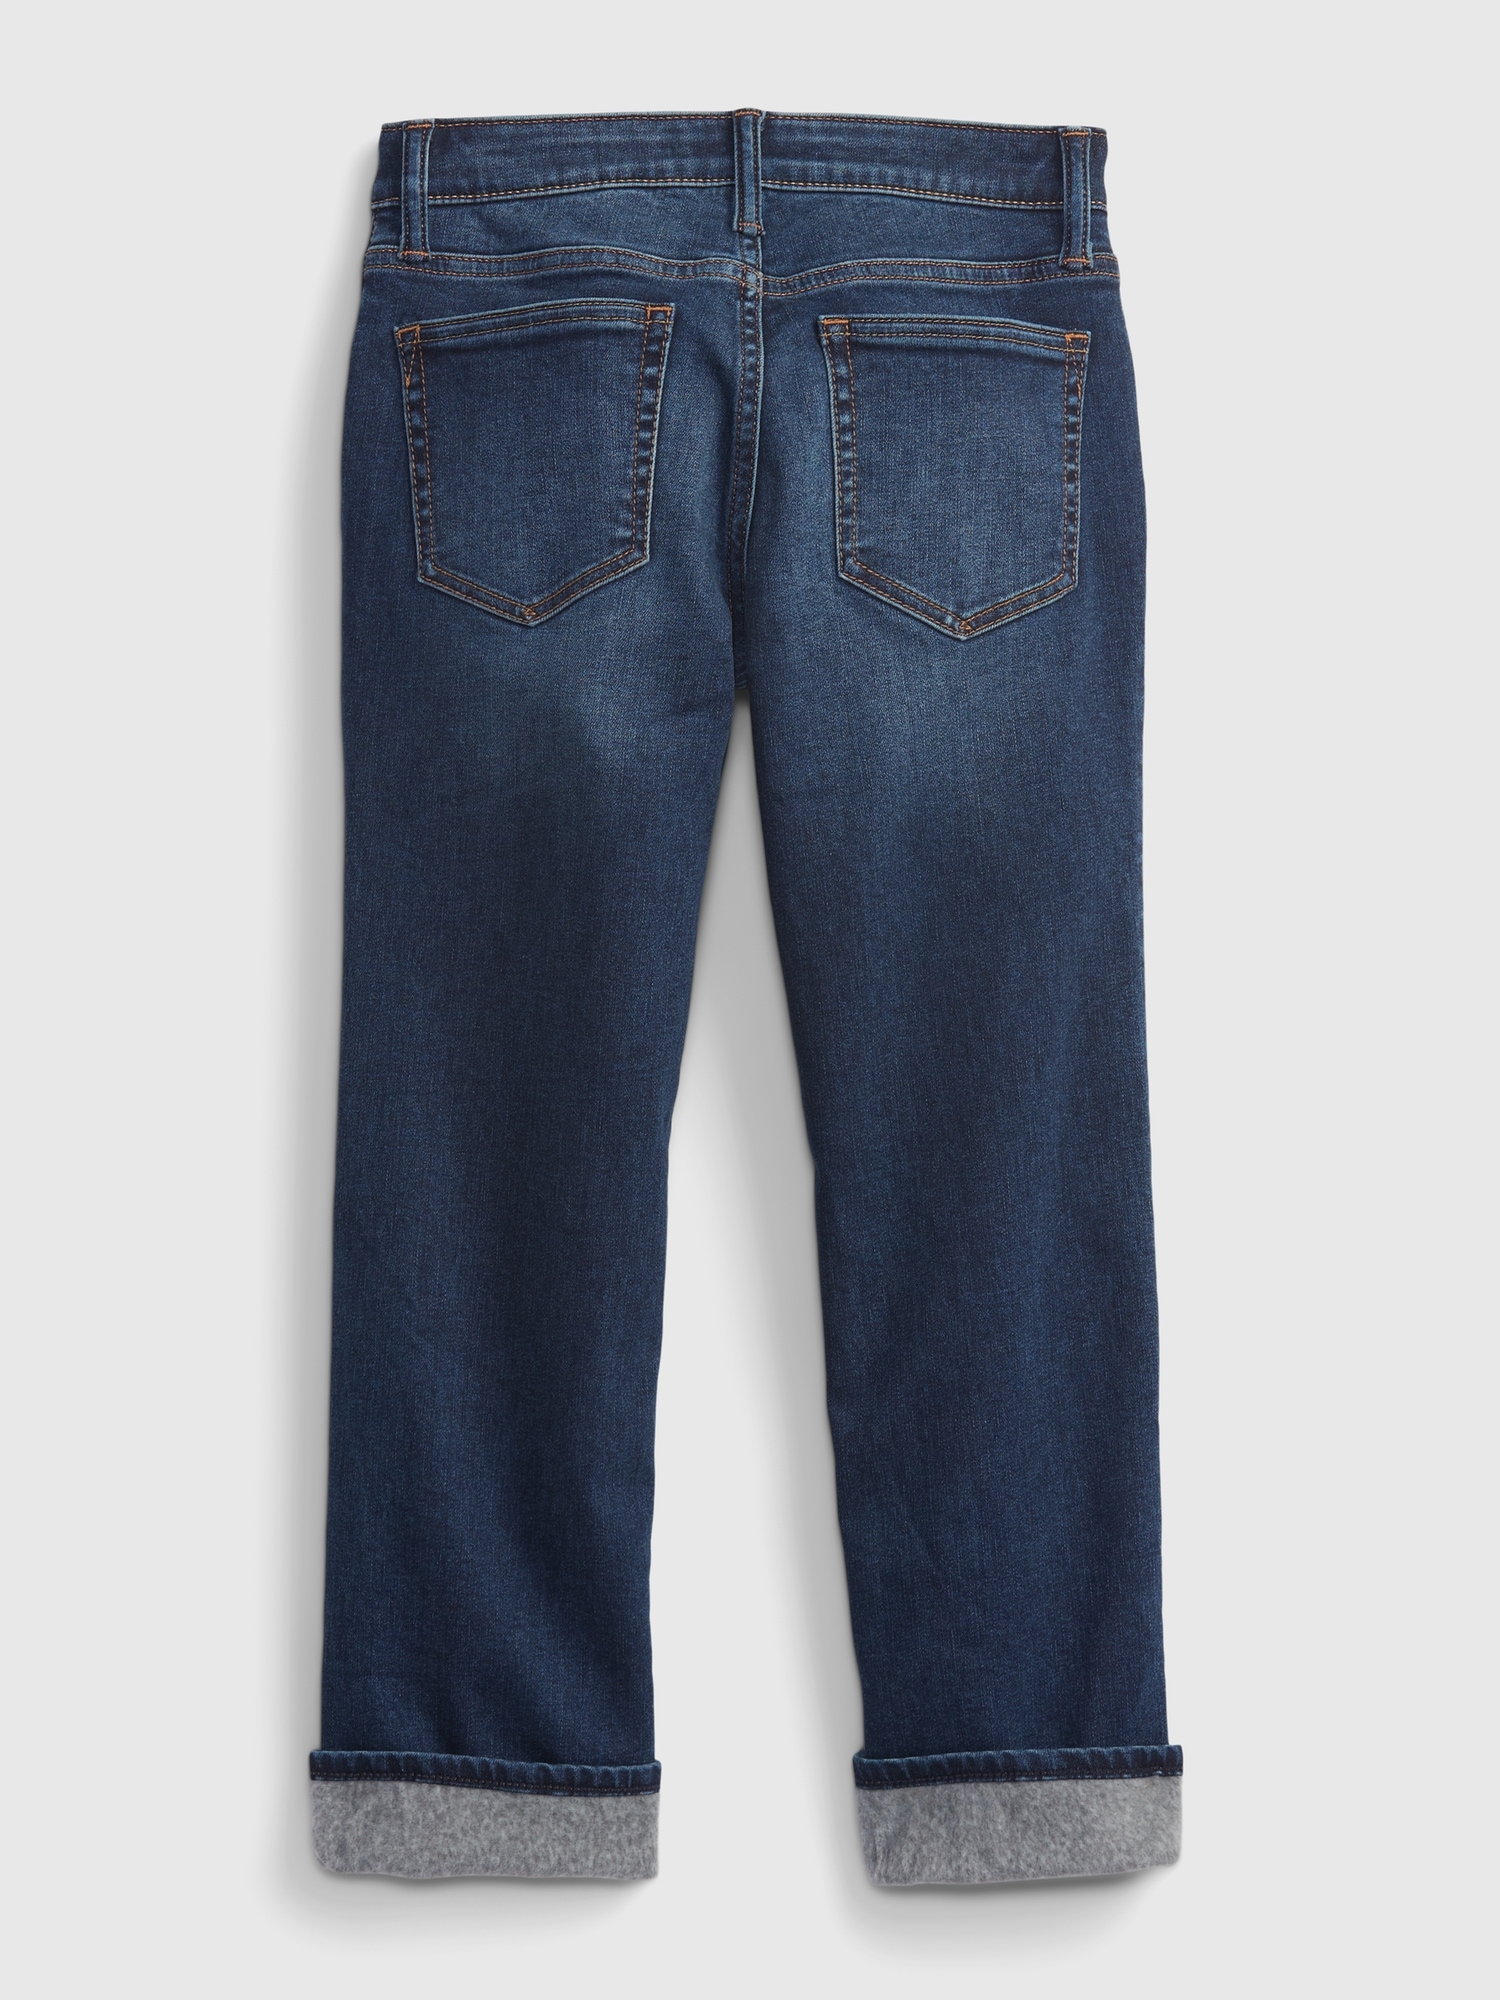 Kids Lined Straight Jeans with Washwell ™ | Gap